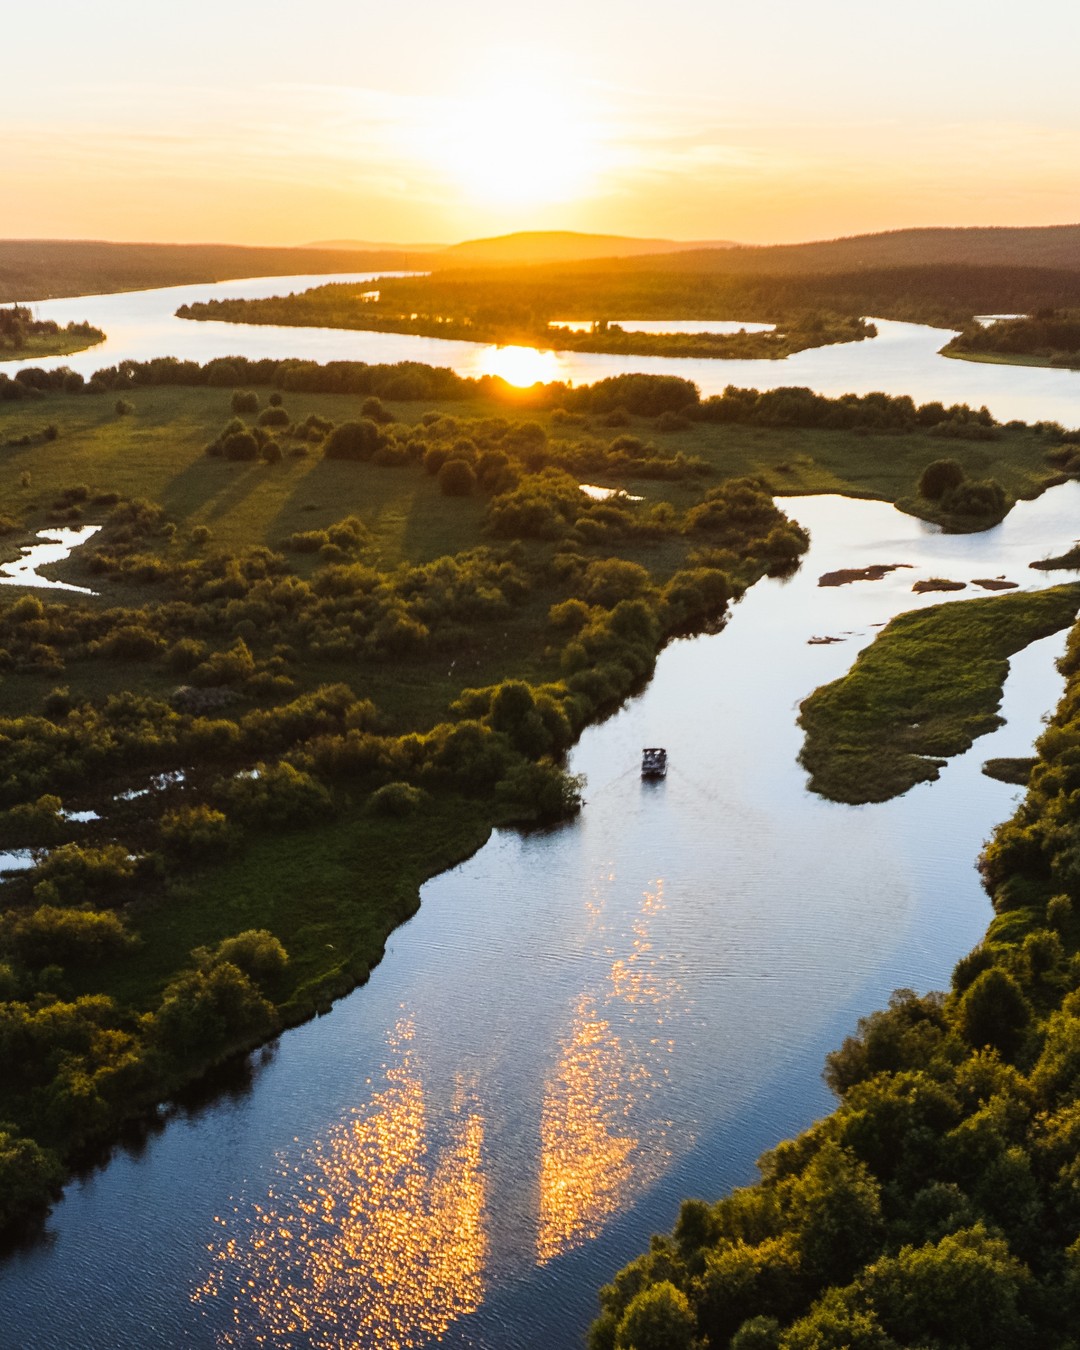 Ounasjoki river deltas, bathing in the light of the Midnight Sun. 🥰🌞

The Midnight Sun shines in Rovaniemi through the summer, creating a magical light phenomena for all waterfronts. Have a look at ways to enjoy the Arctic waters of Rovaniemi summer, link in story!

Image with @laplandsafaris 

#rovaniemi #visitrovaniemi #lapland #laplandfinland #finland #arcticcircle #arctic #river #ounasjokiriver #ounasjokiriverdeltas #riverdelta #midnightsun #nightlessnight #lappi #keskiyönaurinko #rivercruise #watersports #napapiiri #jokiristeily